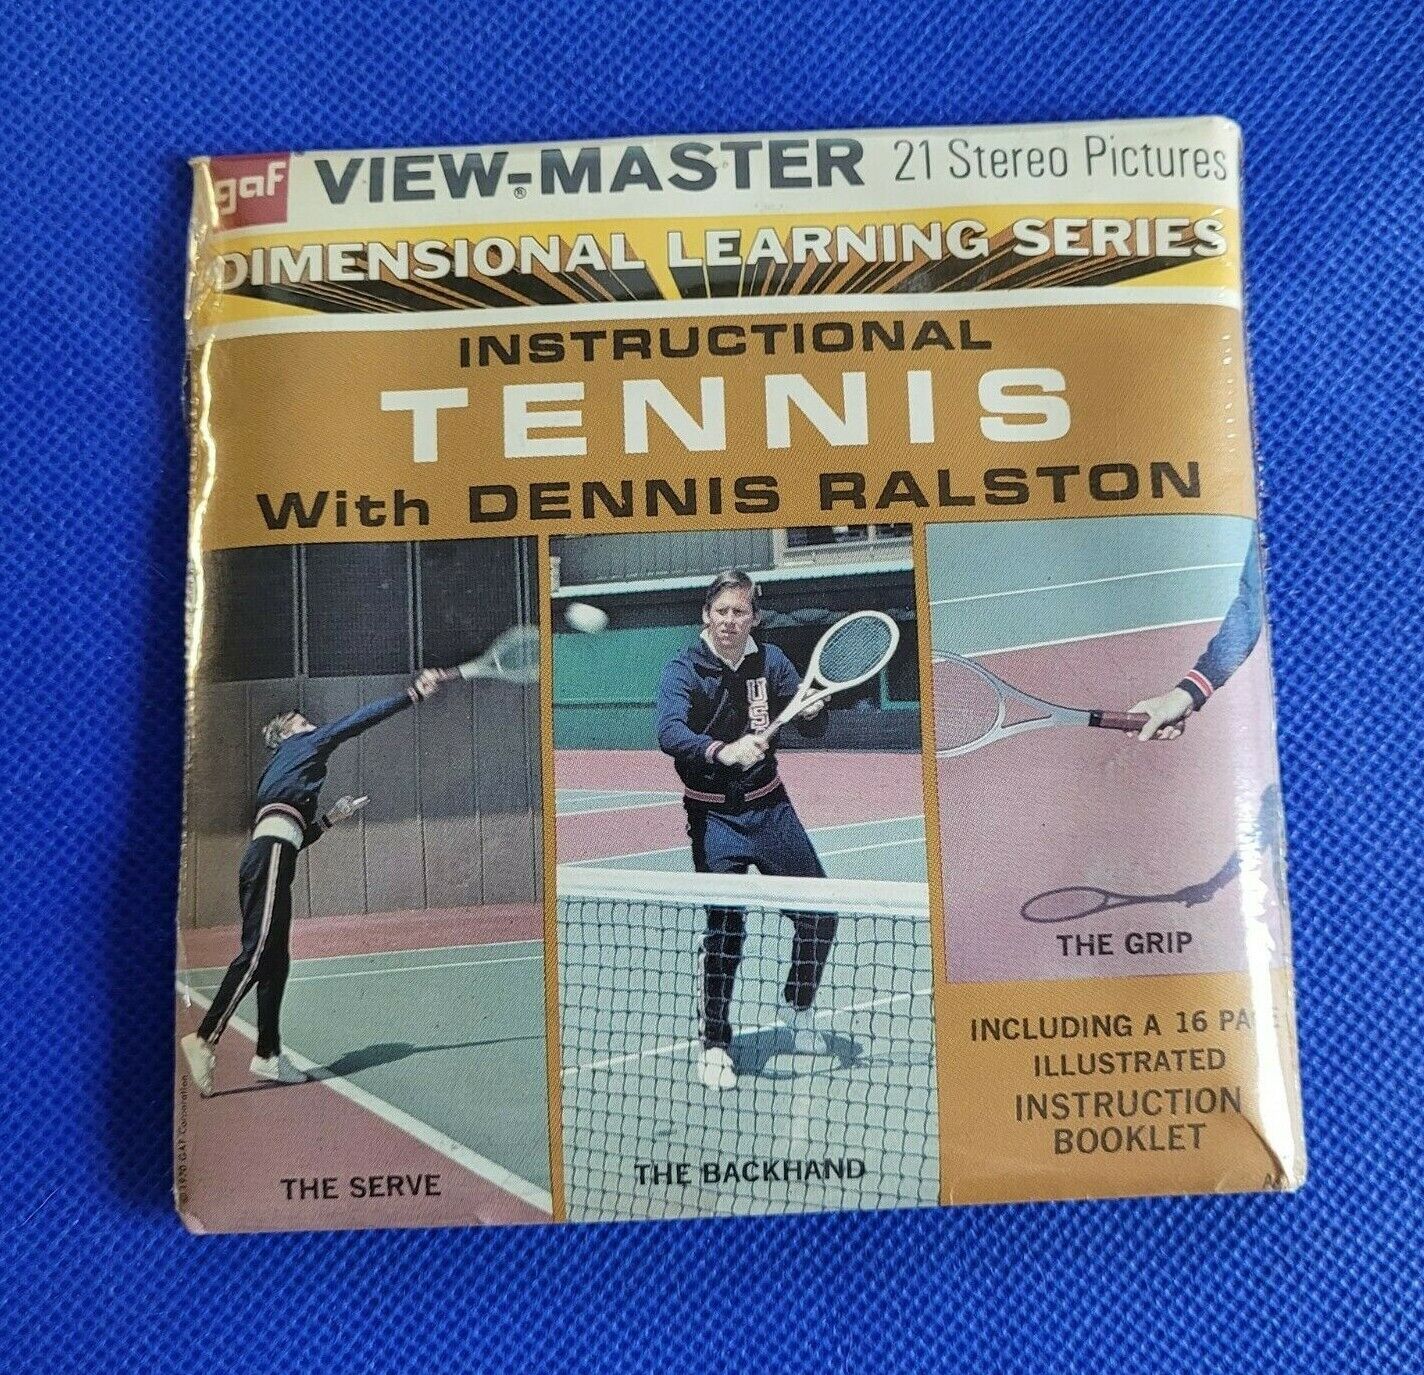 SEALED B954 Instructional Tennis Dennis Ralston Sports view-master Reels Packet